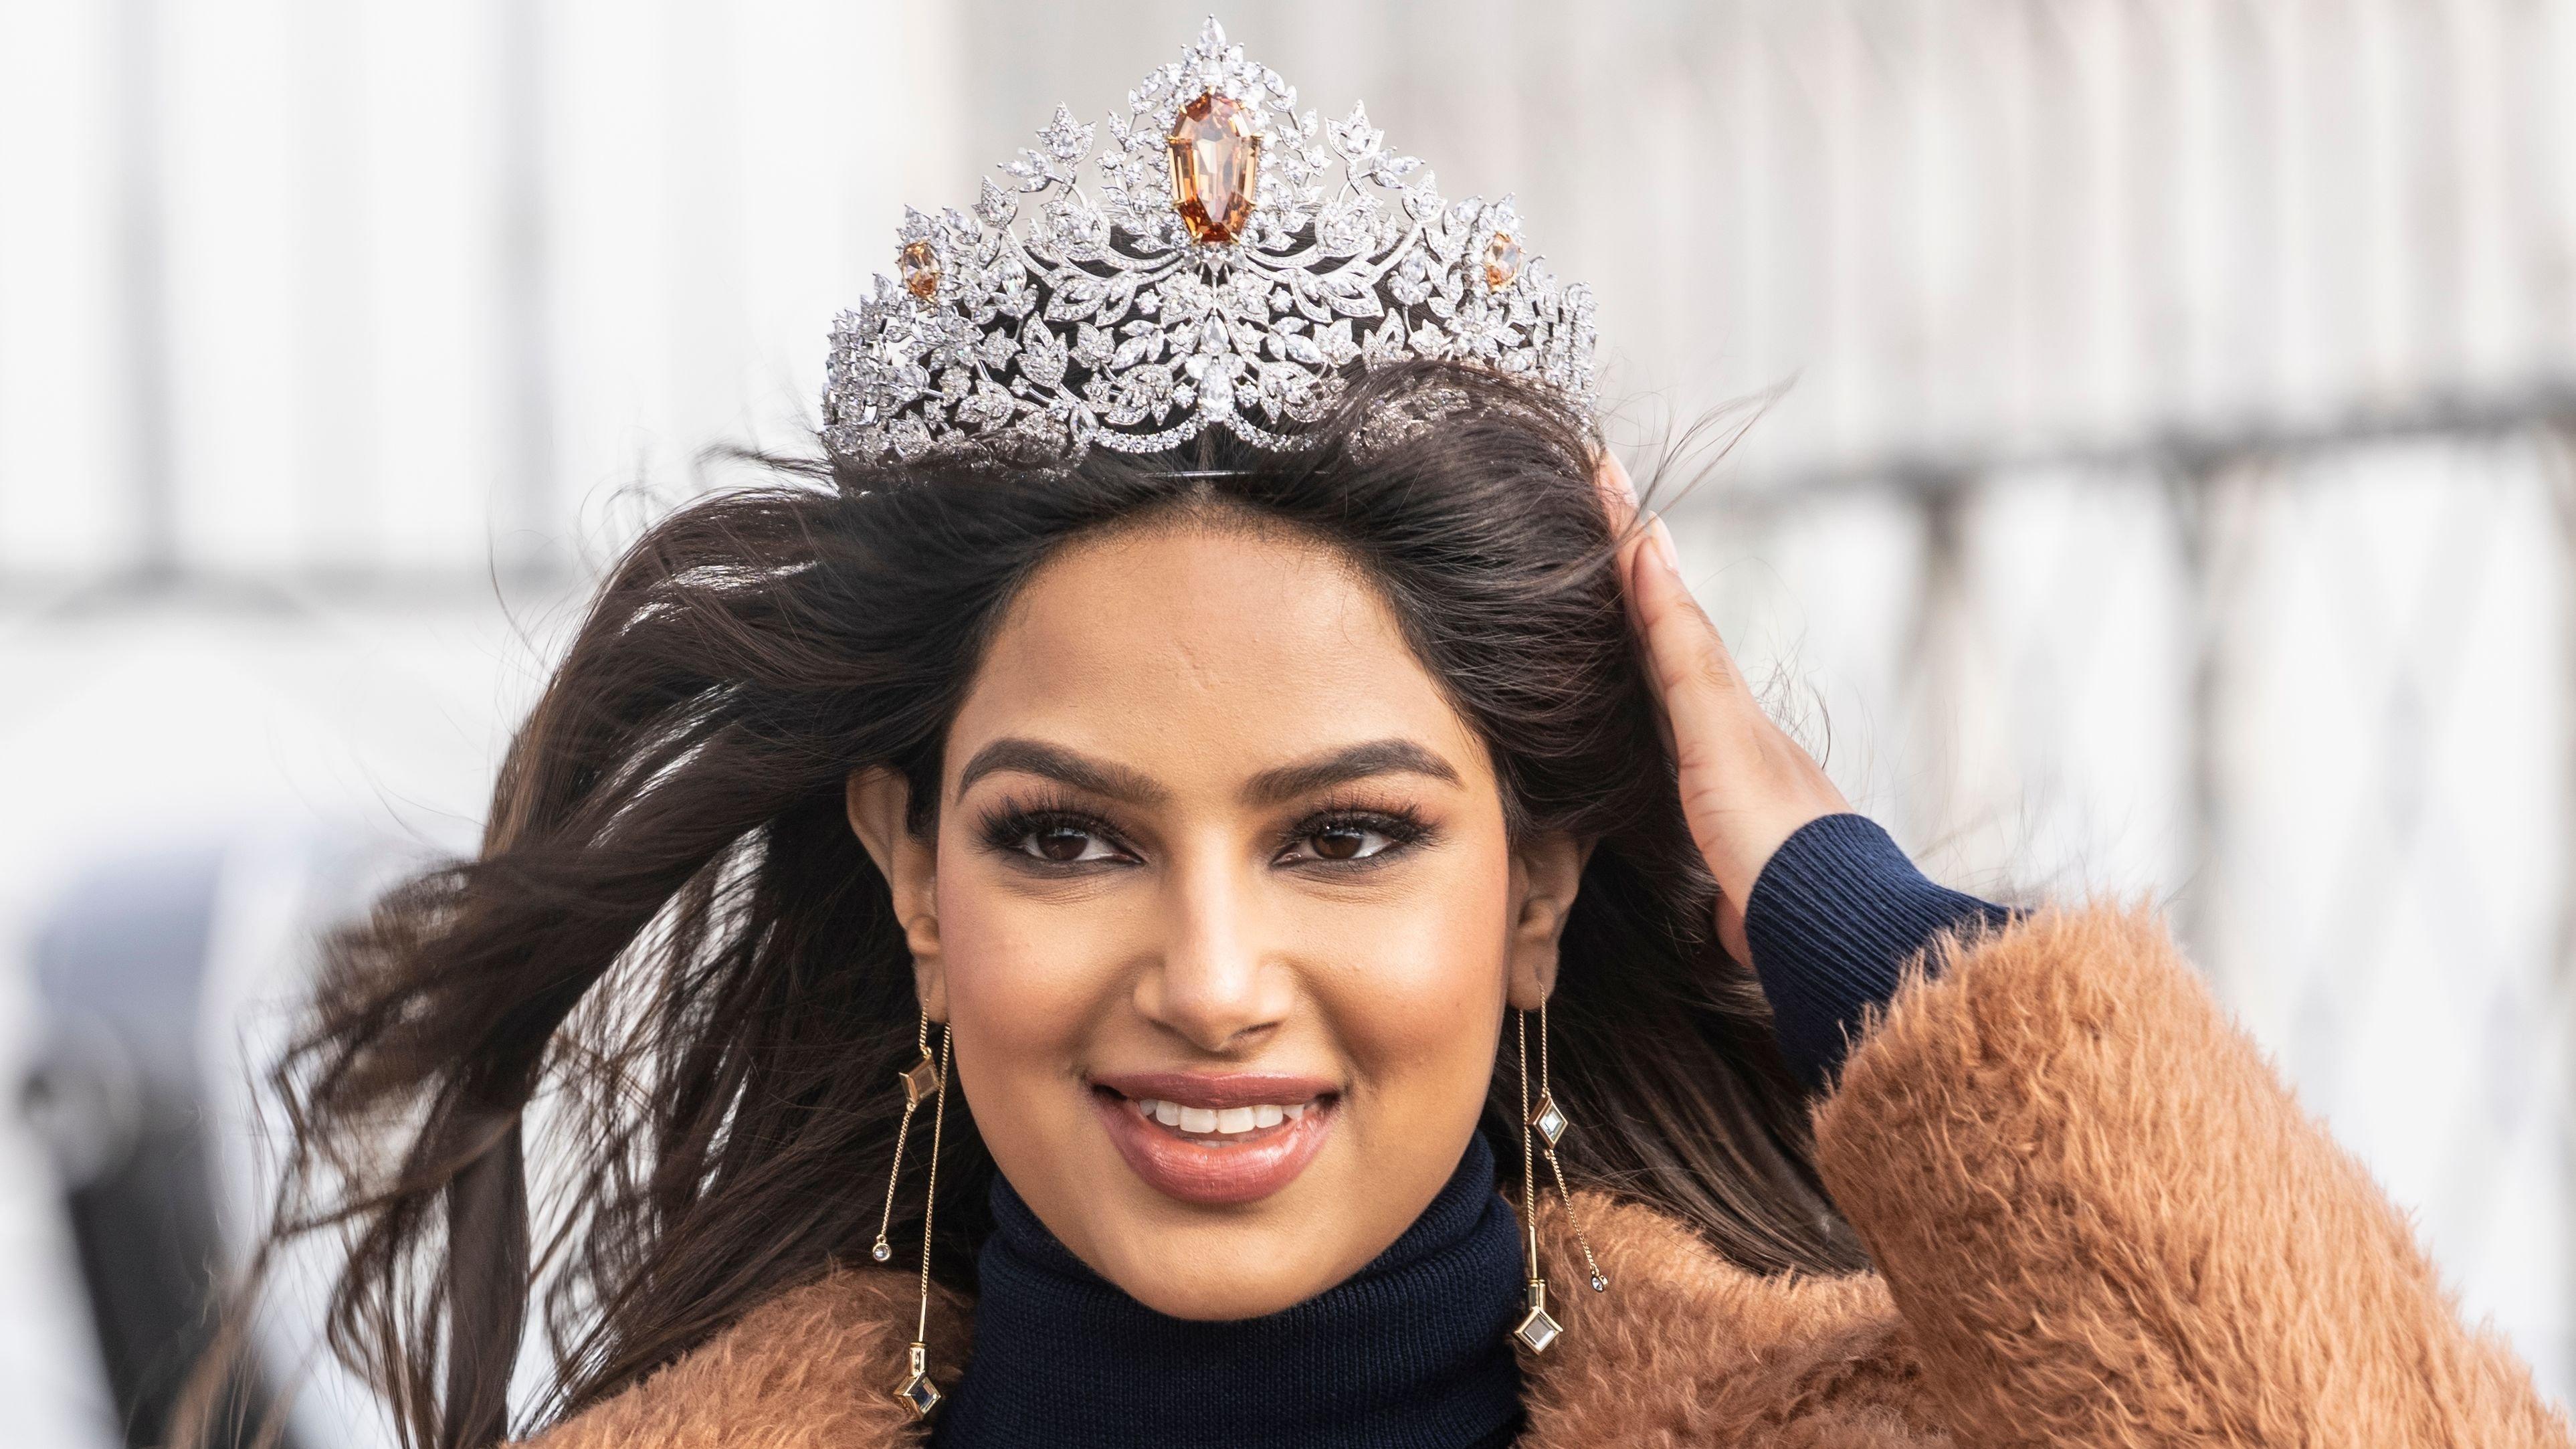 Its About The Neck Hands And Hips Says Miss Universe Harnaaz Sandhu As She Teaches Trevor